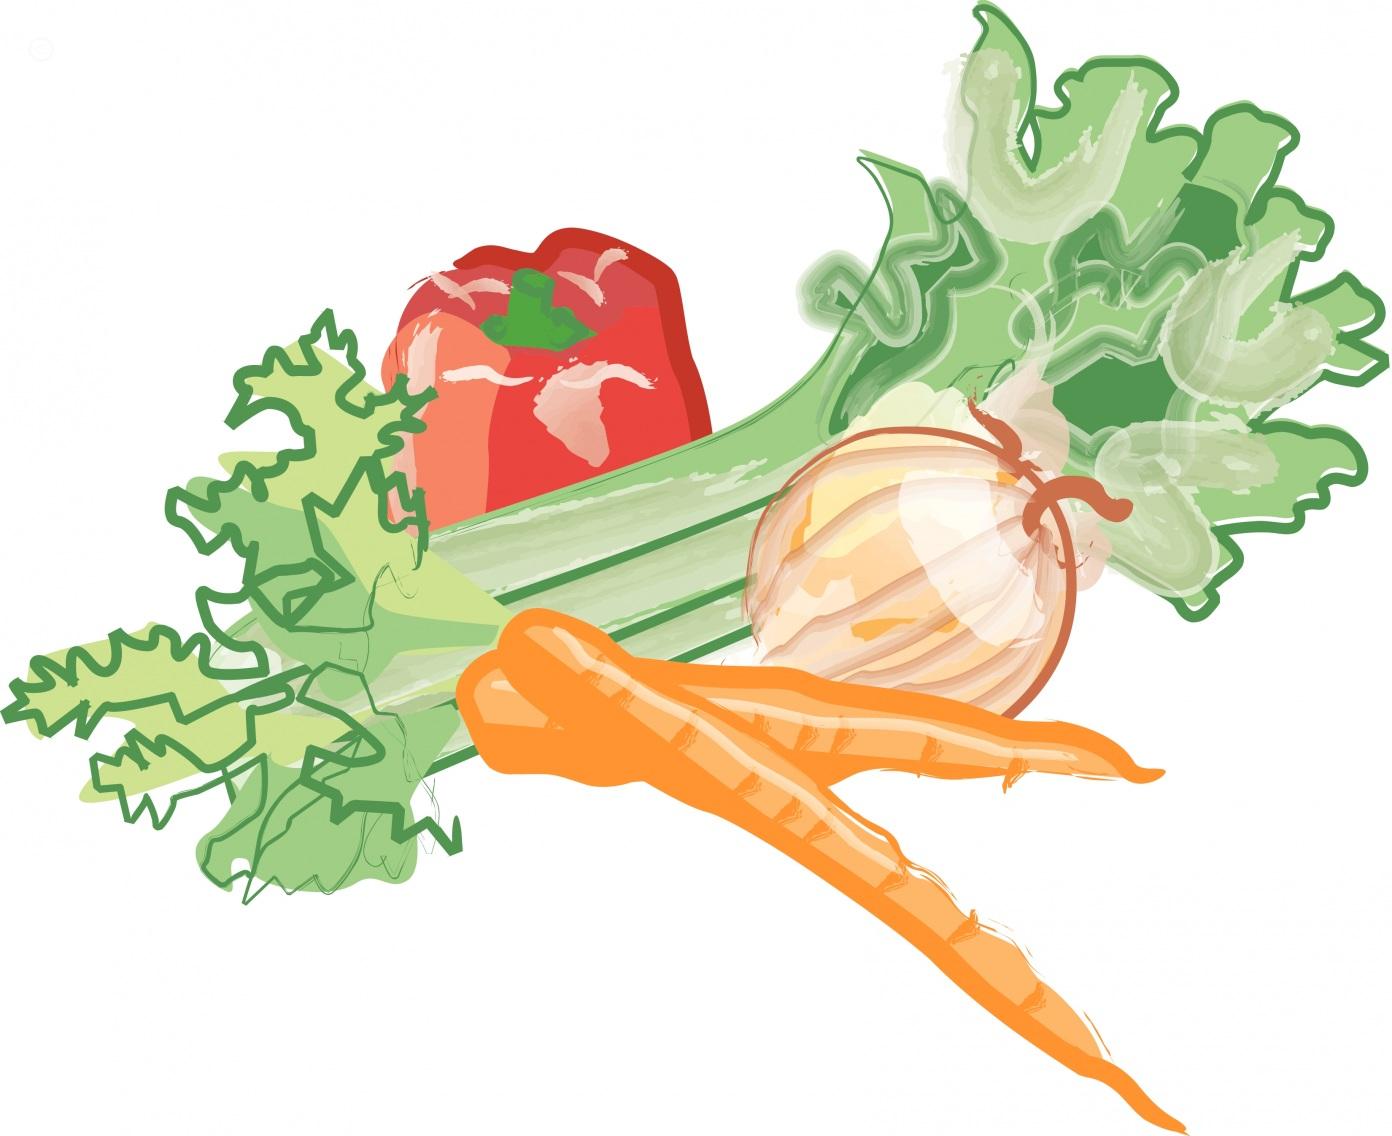 Vegetable garden clipart free images 2